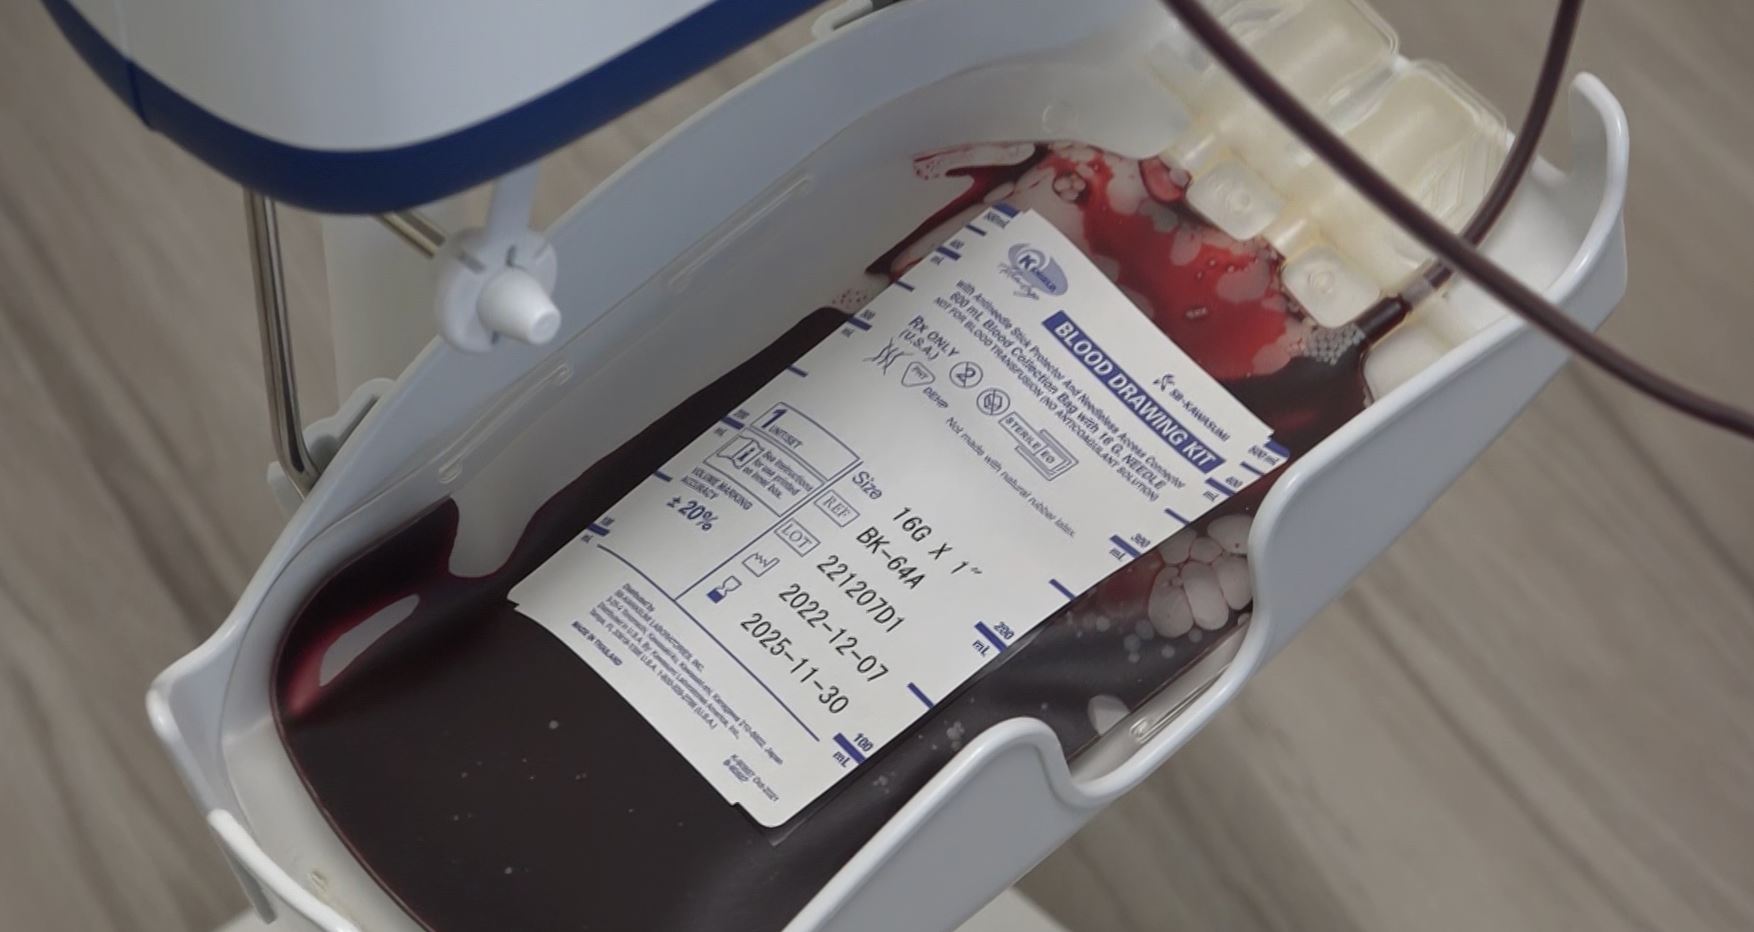 Close-up of a medical device containing a blood bag labeled with patient information, blood type, and expiration date. Blood tubes are connected to the bag, and there's blood present in the device.